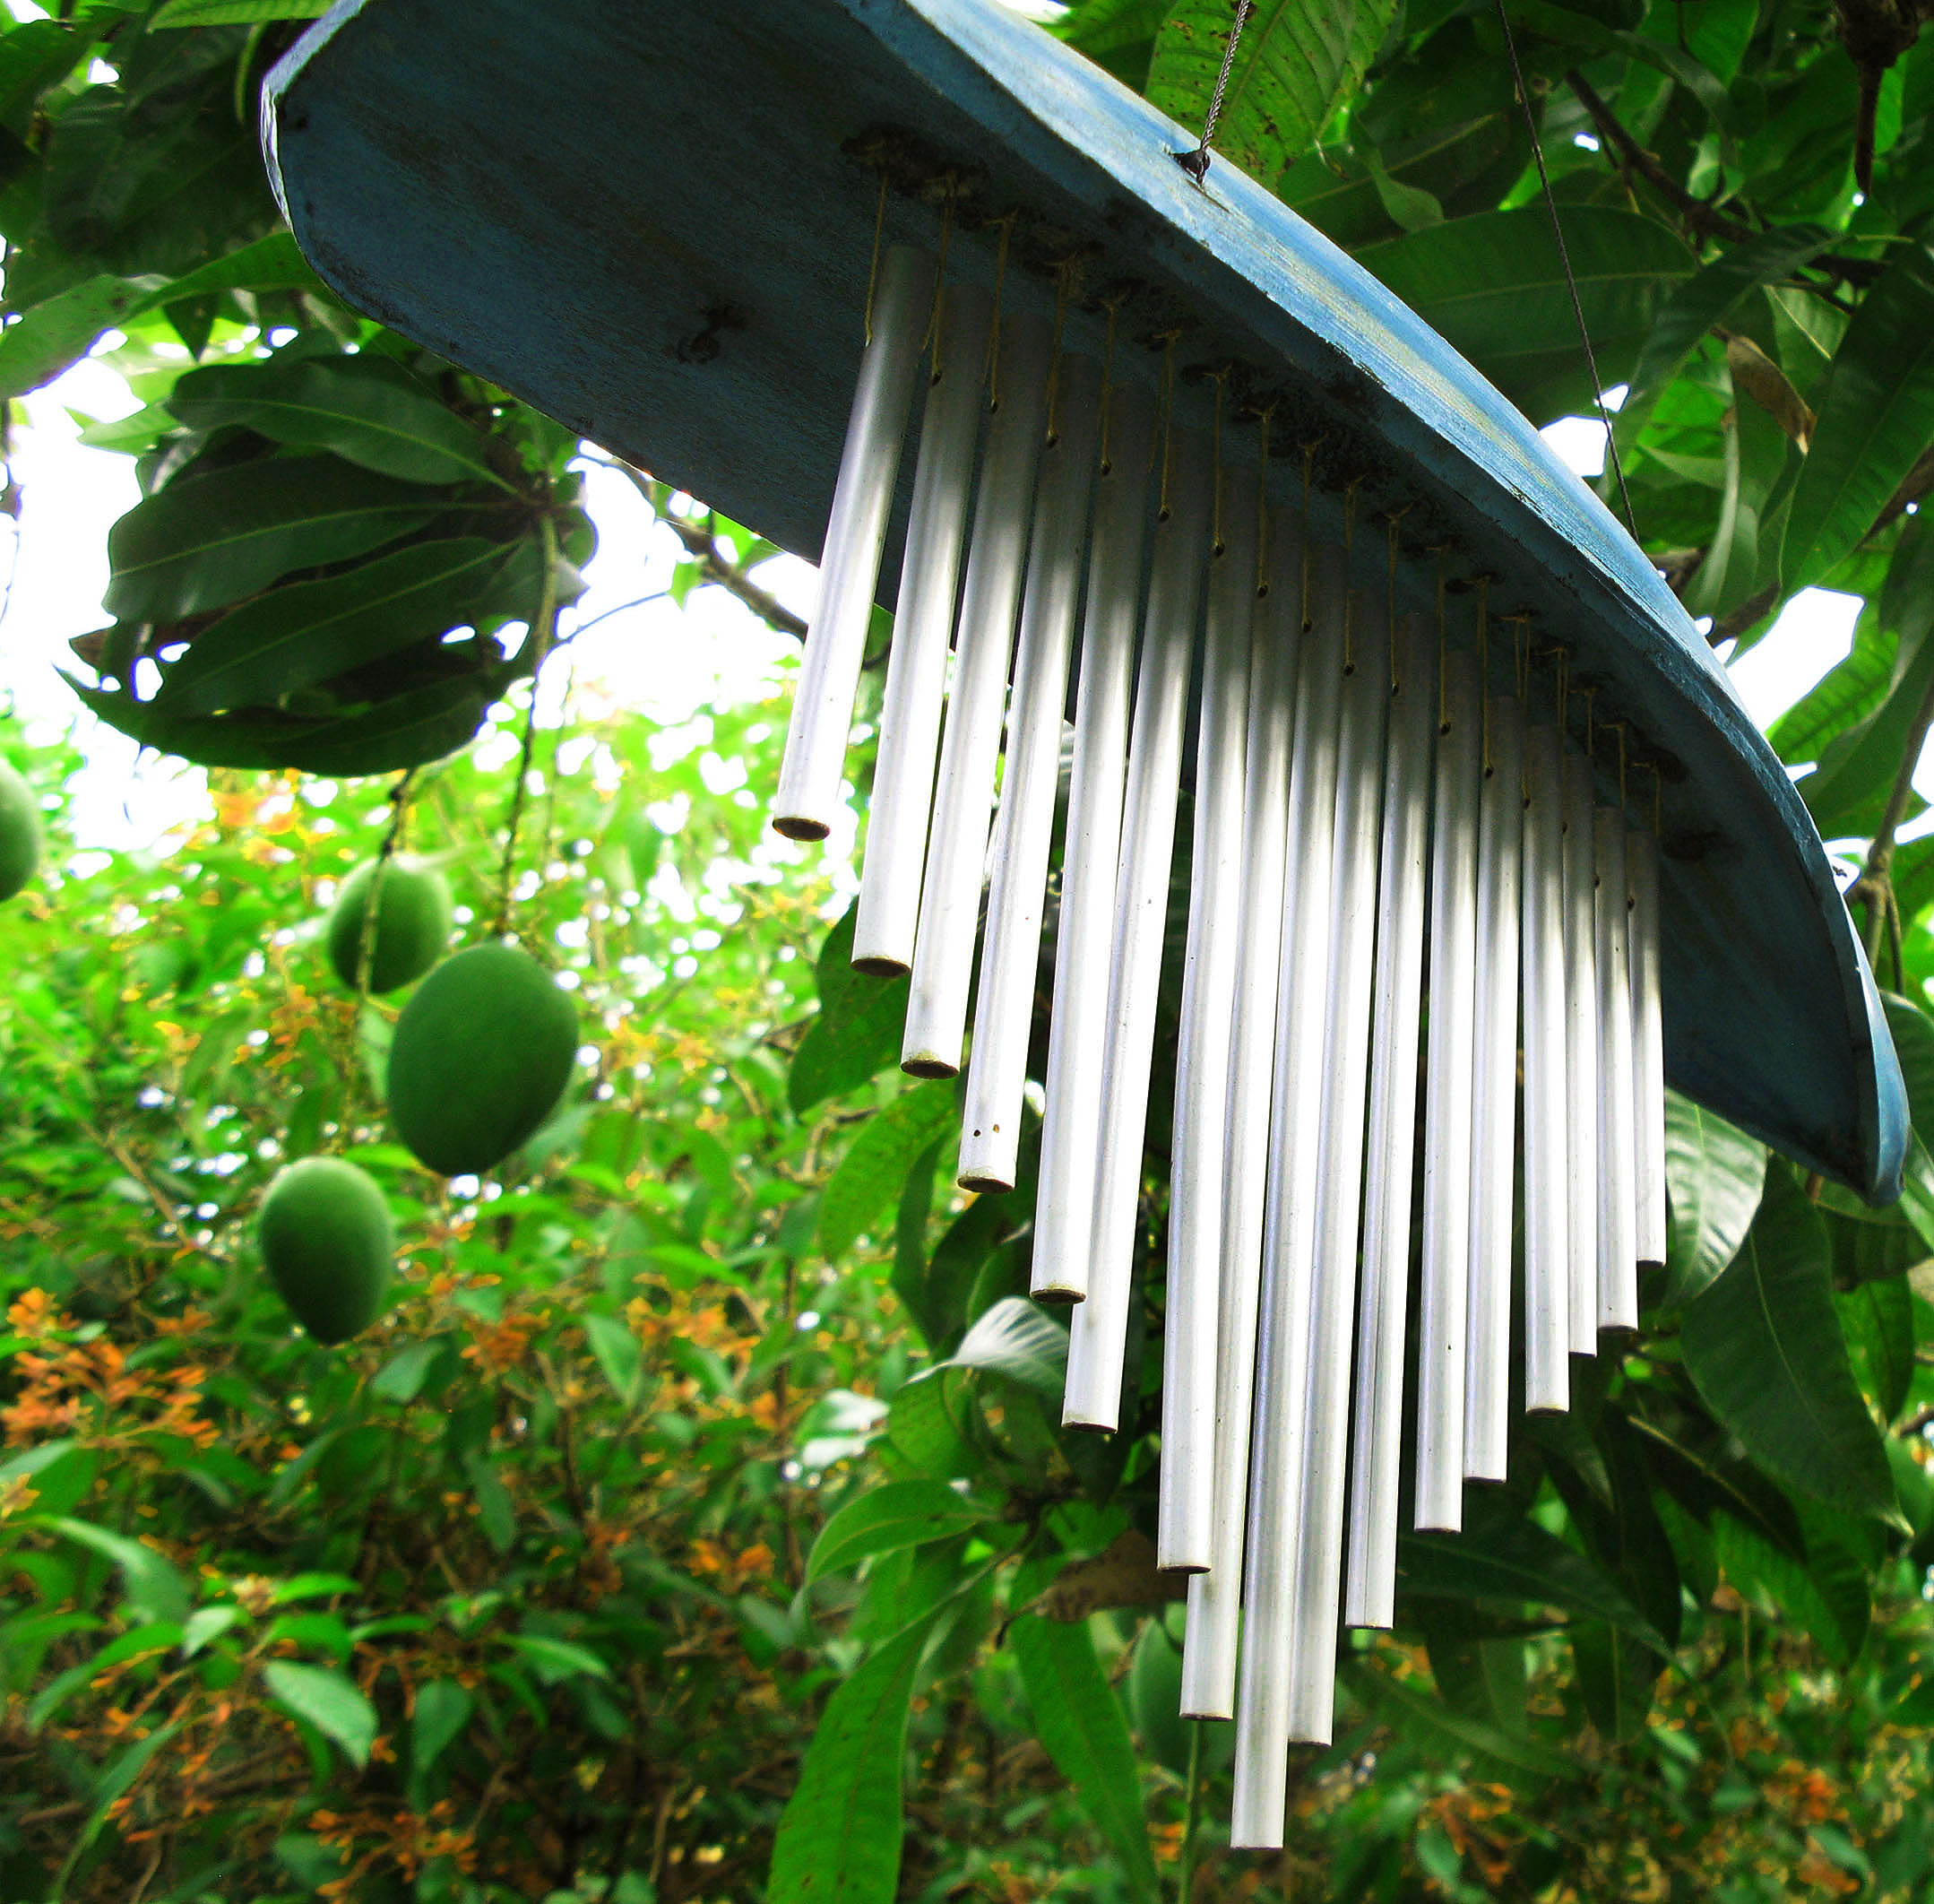 Three Reasons Why Wind Chimes Make Excellent Sympathy Gifts